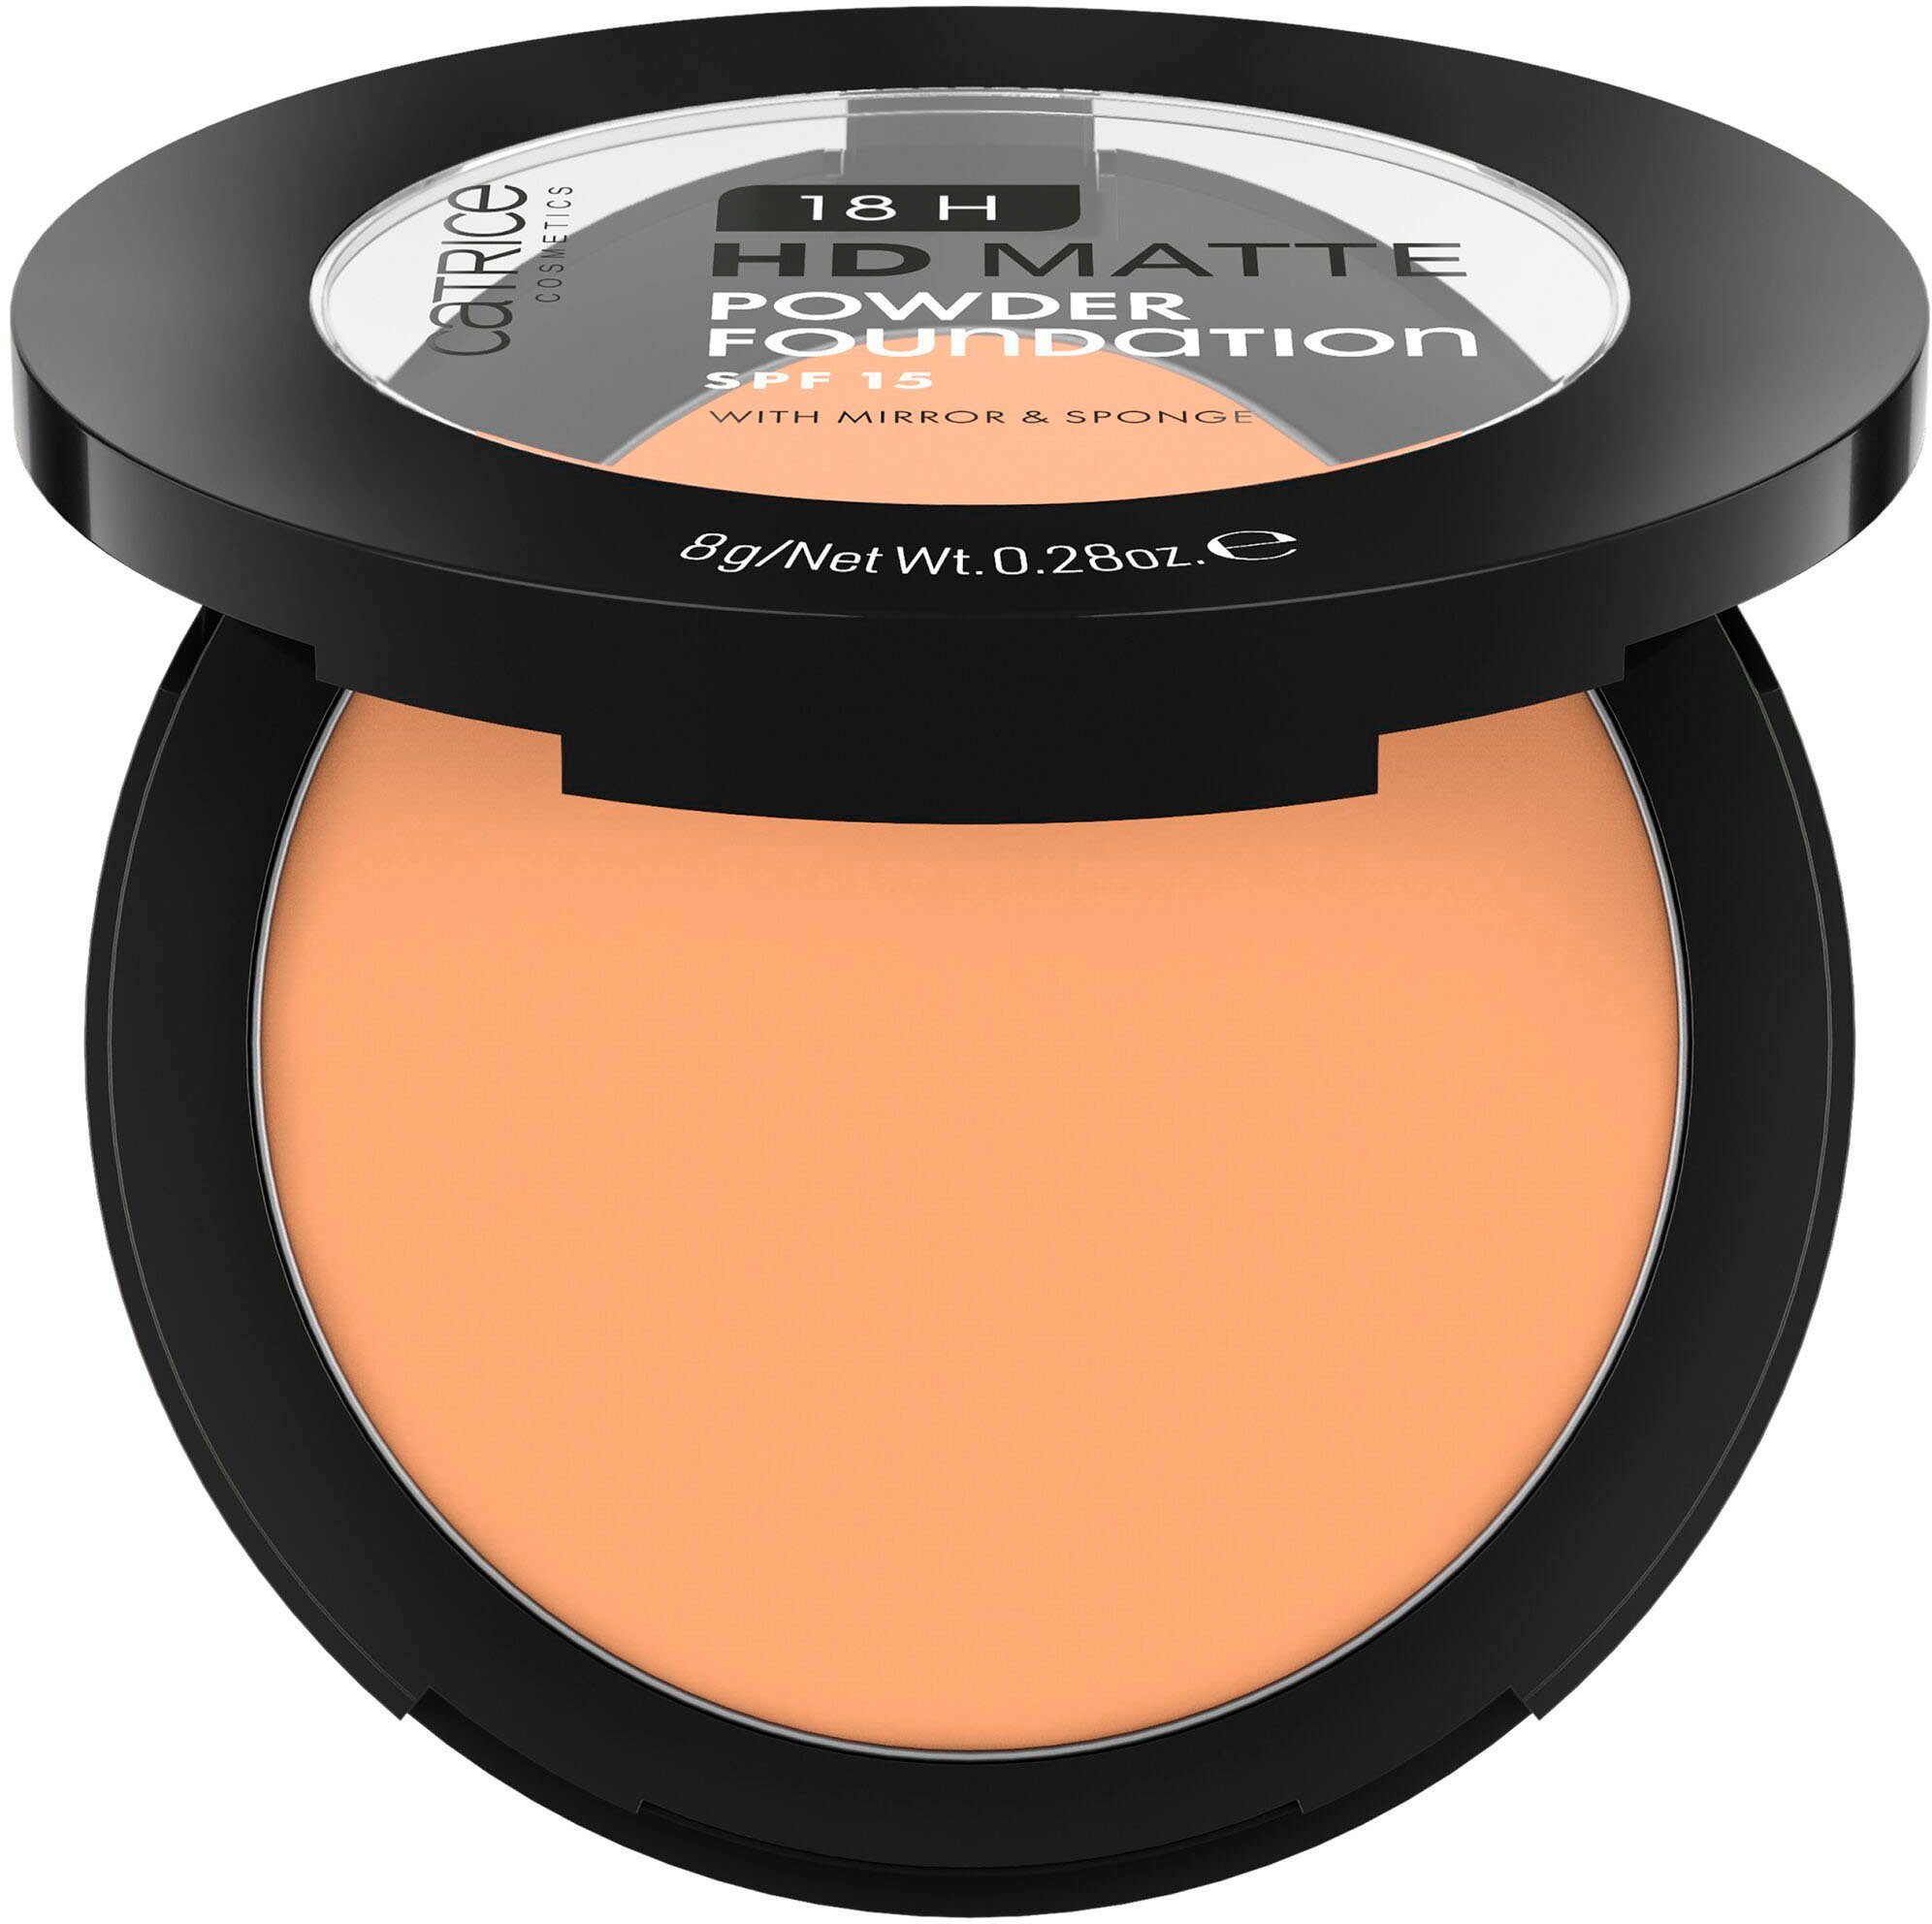 HD Matte Foundation, 045N 3-tlg. Catrice Powder Puder nude 18H